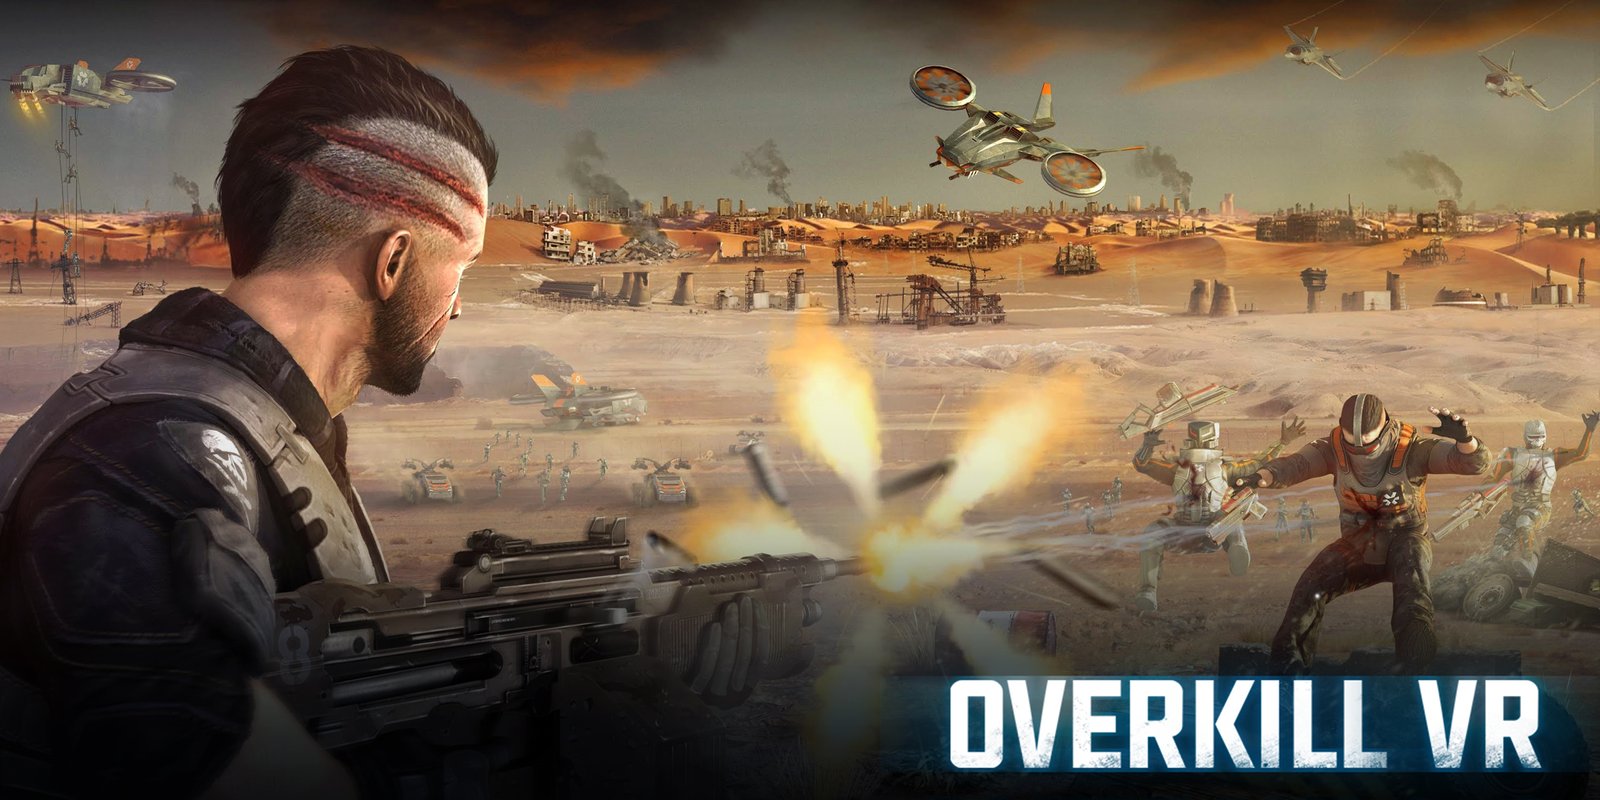 Overkill VR: Action FPS | Games from Spain